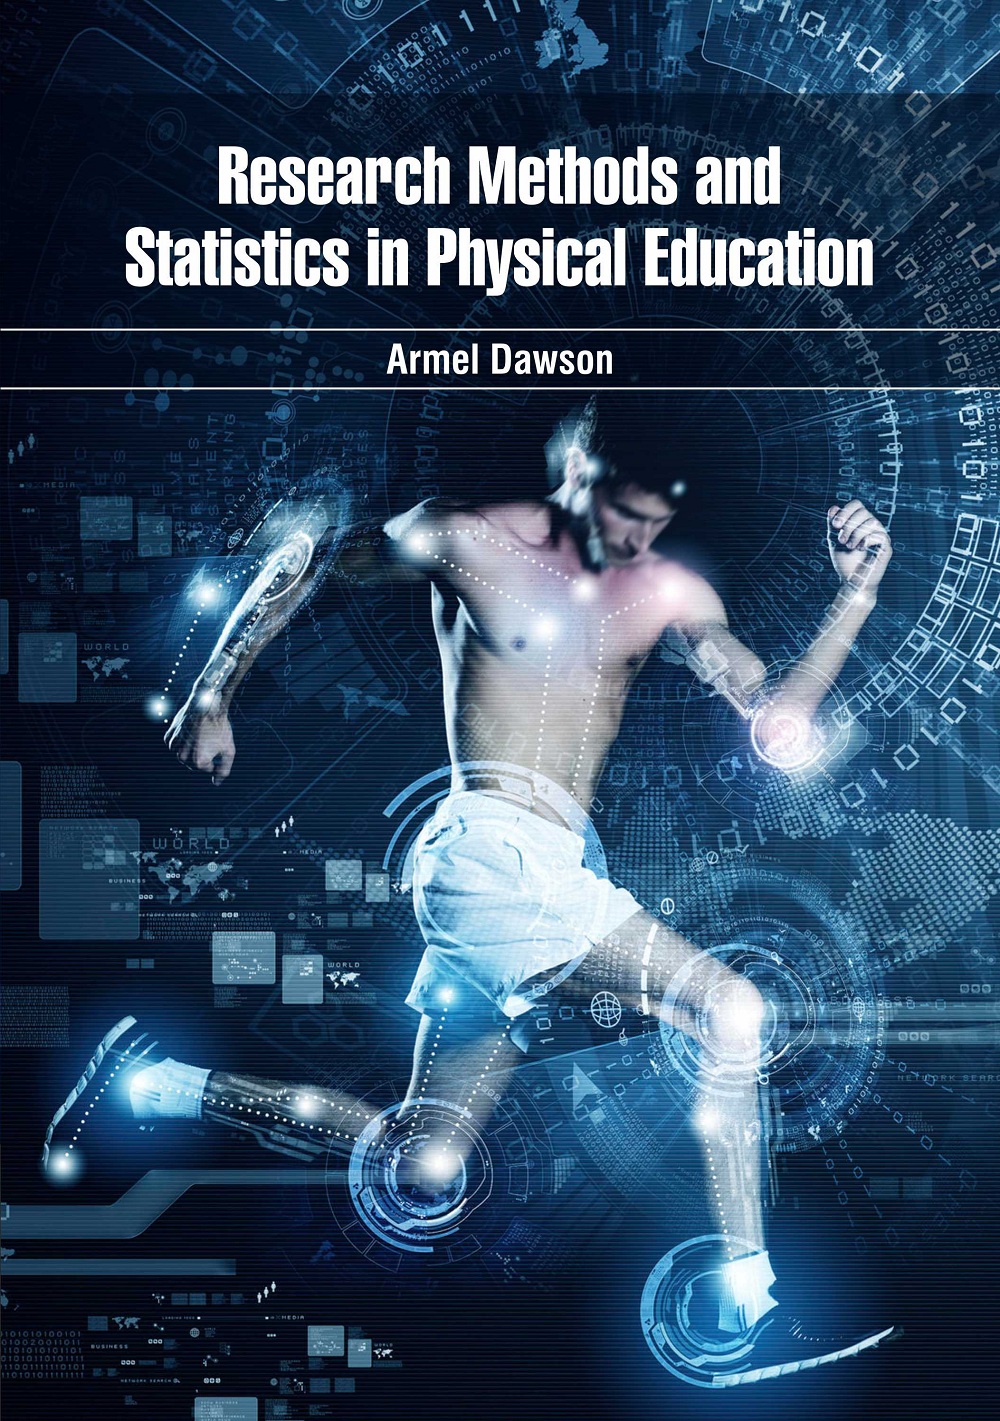 Research Methods and Statistics in Physical Education